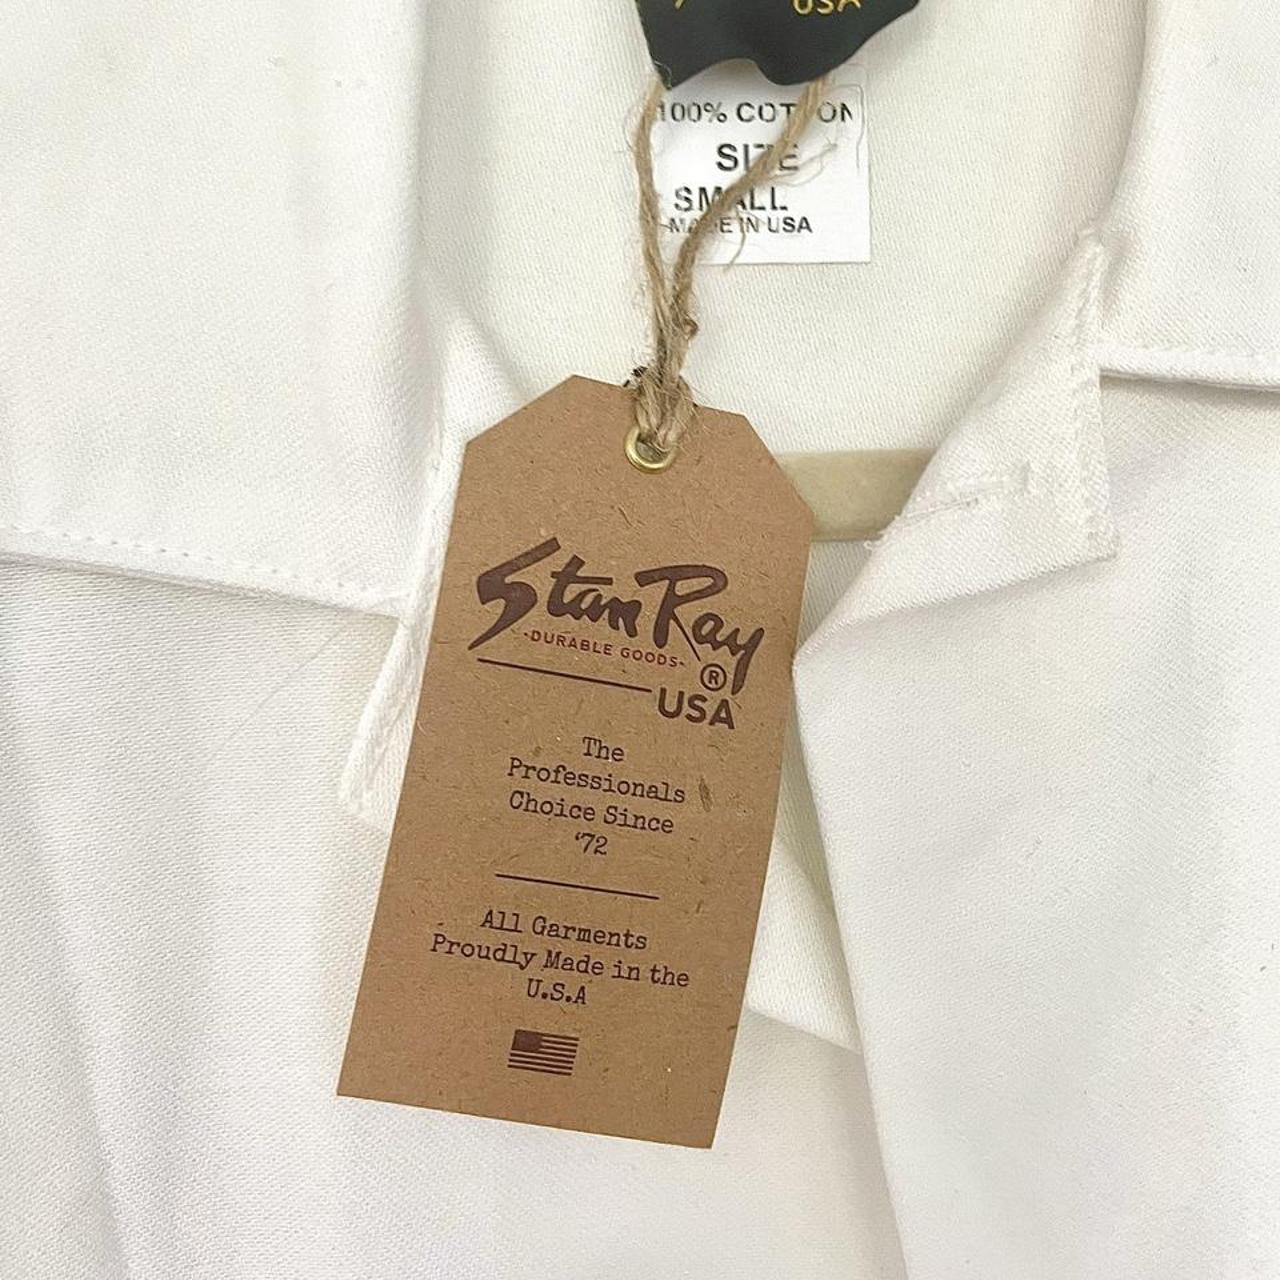 Product Image 3 - Stan Ray White Chore/Shop Coat

New